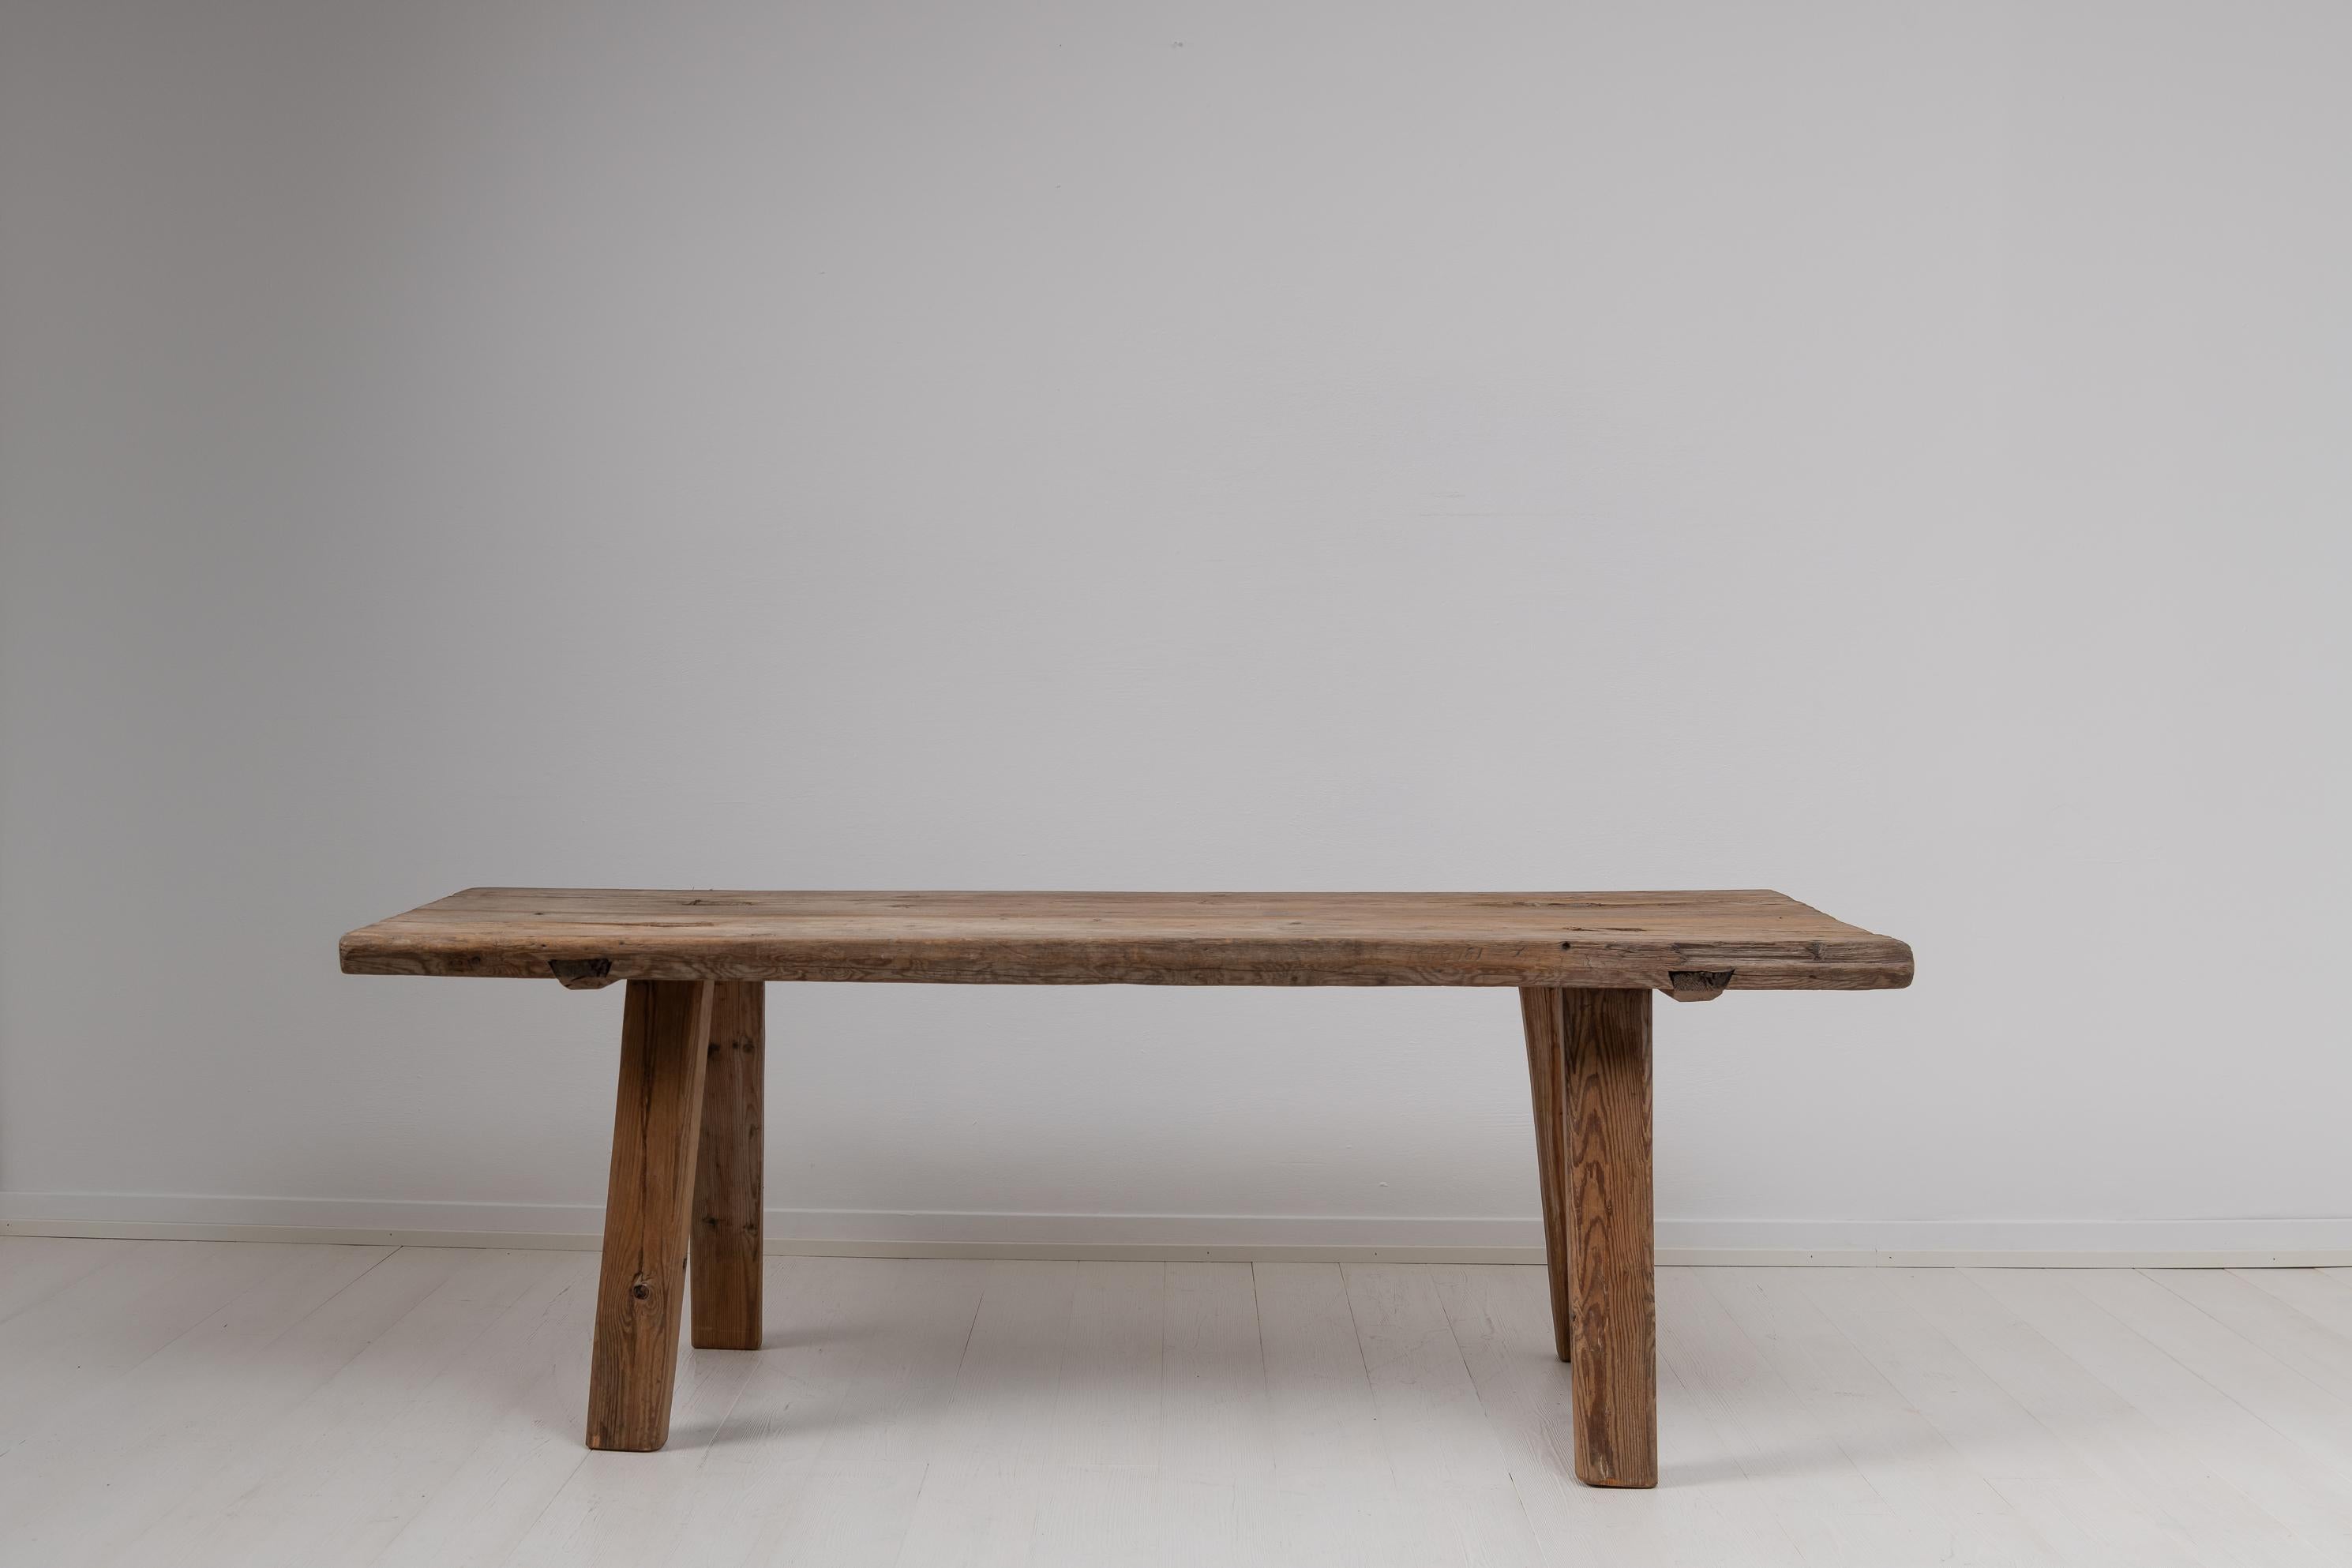 Hand-Crafted Late 18th Century Swedish Rustic Folk Art Pine Table  For Sale